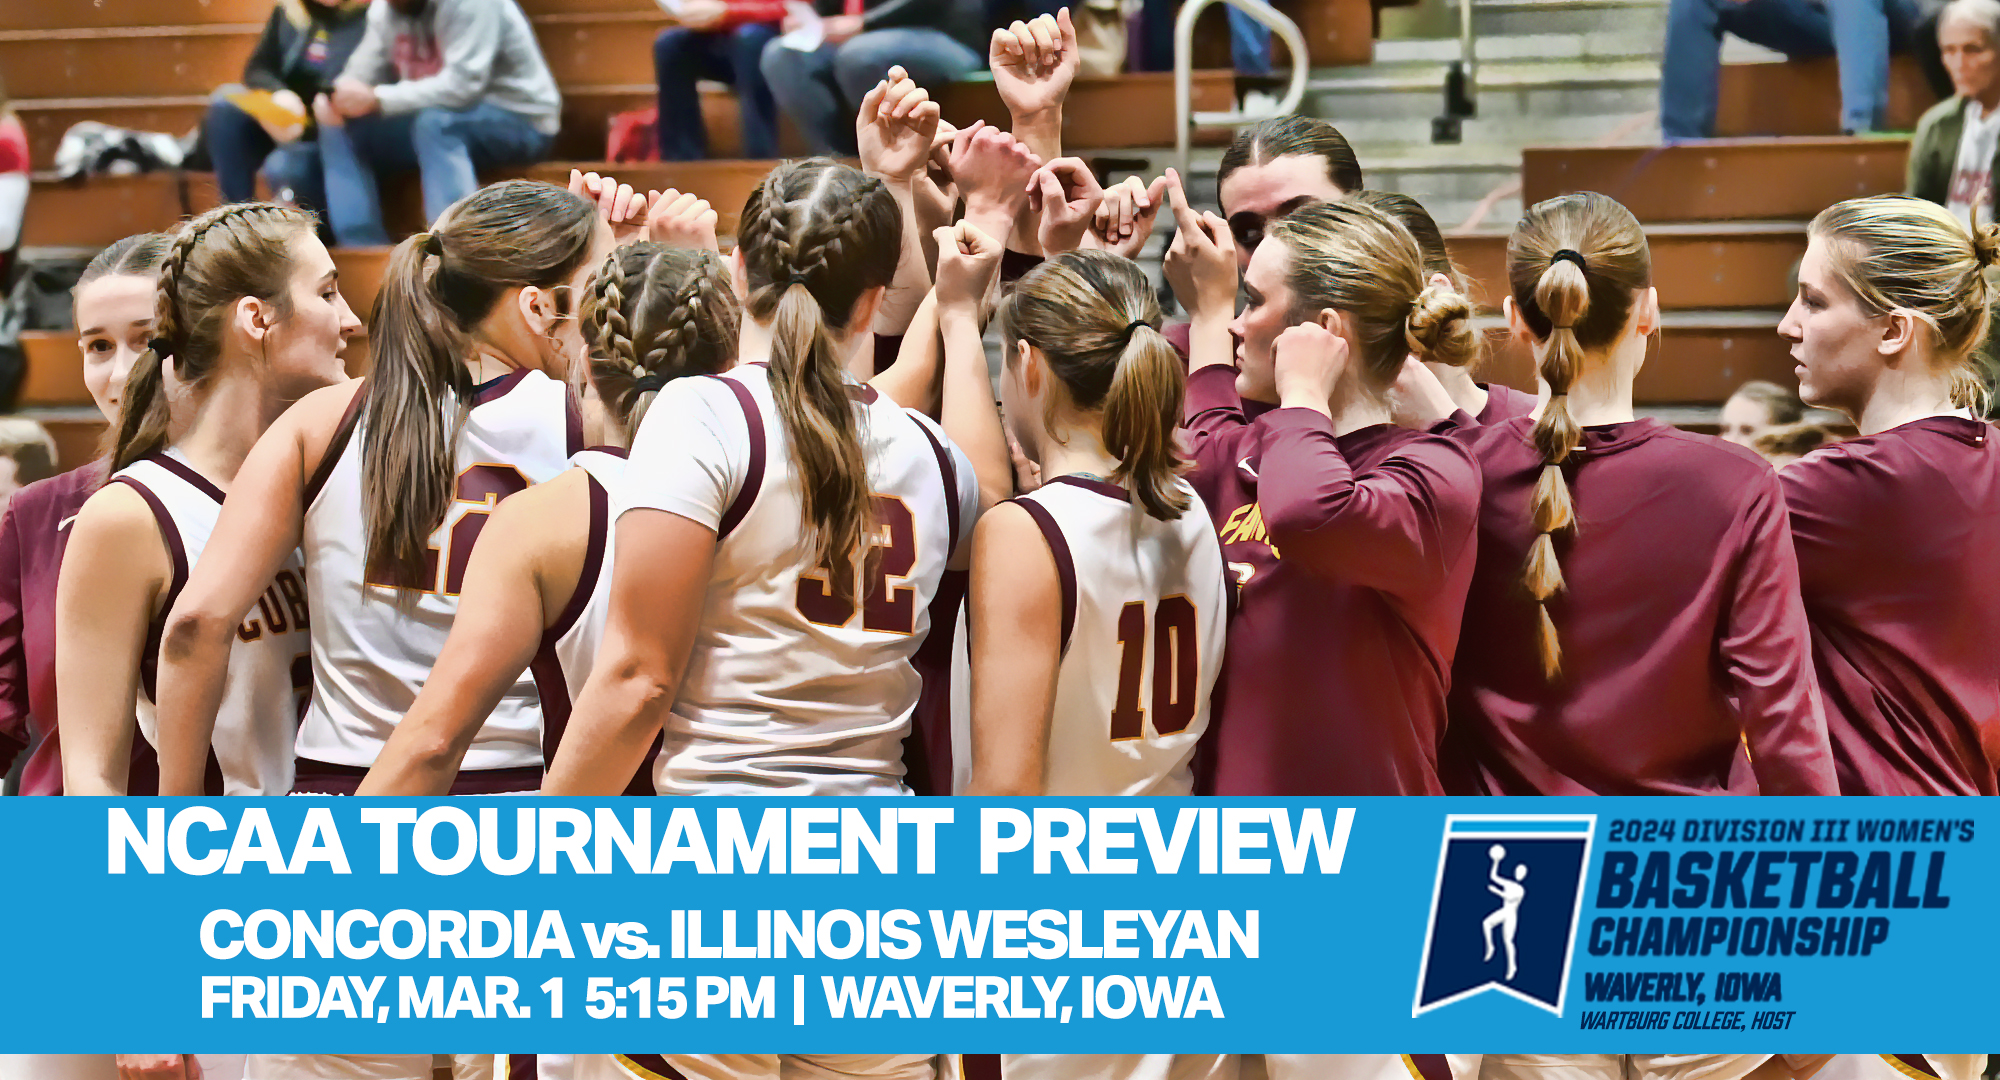 Concordia will face No.20-ranked Illinois Wesleyan in the first round of the NCAA Tournament on Friday, Mar. 1 at 5:15 p.m. at Wartburg College.